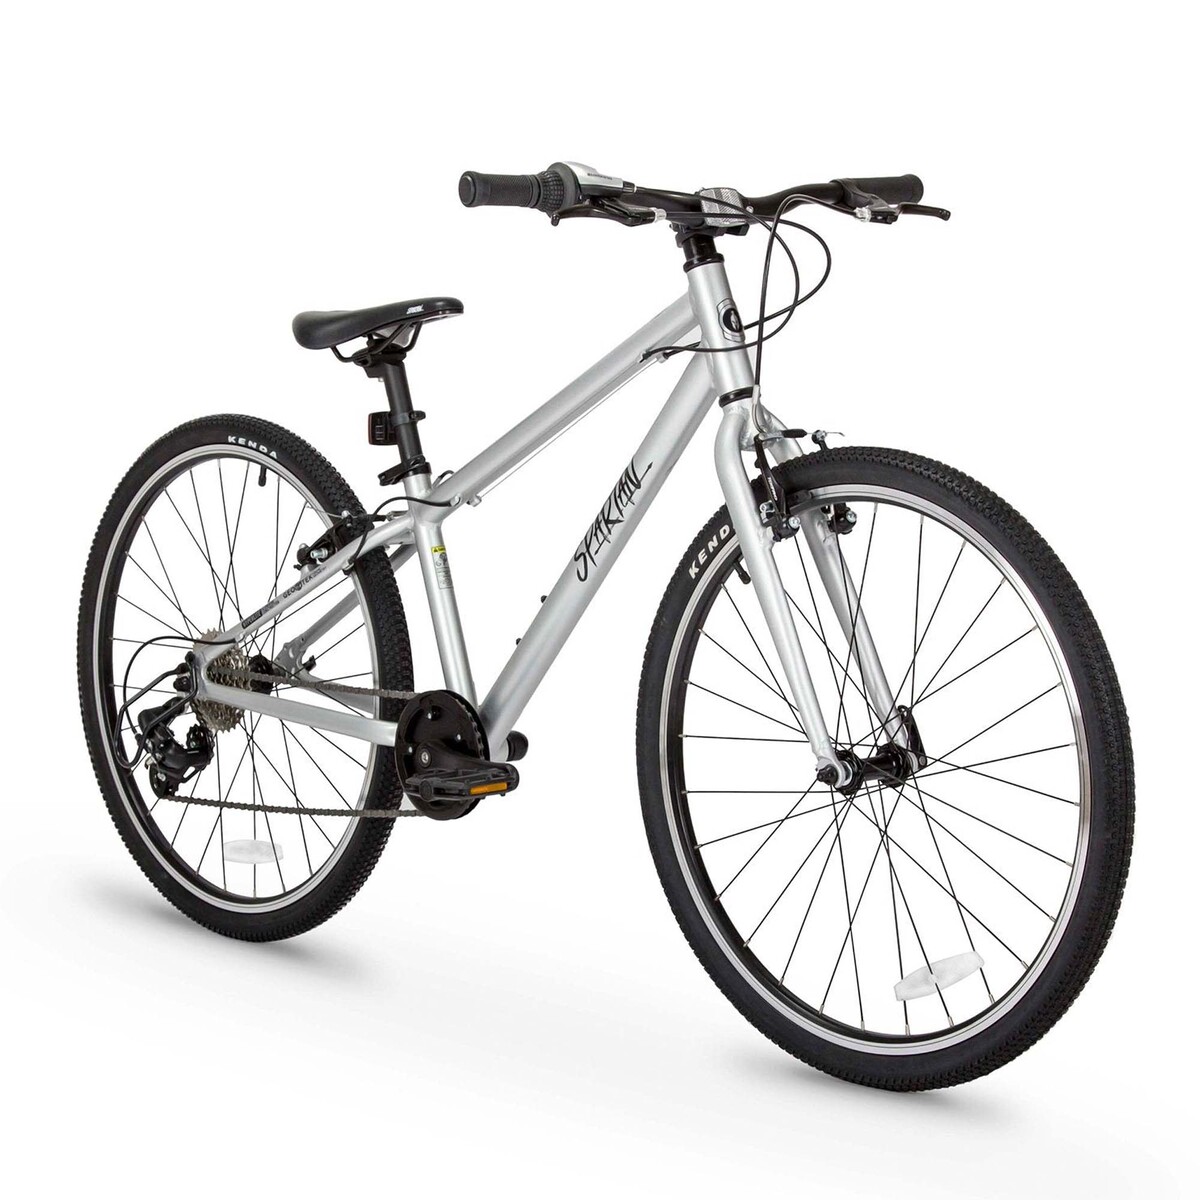 Spartan 26 inches Hyperlite Alloy Bicycle, Silver, SP-3145